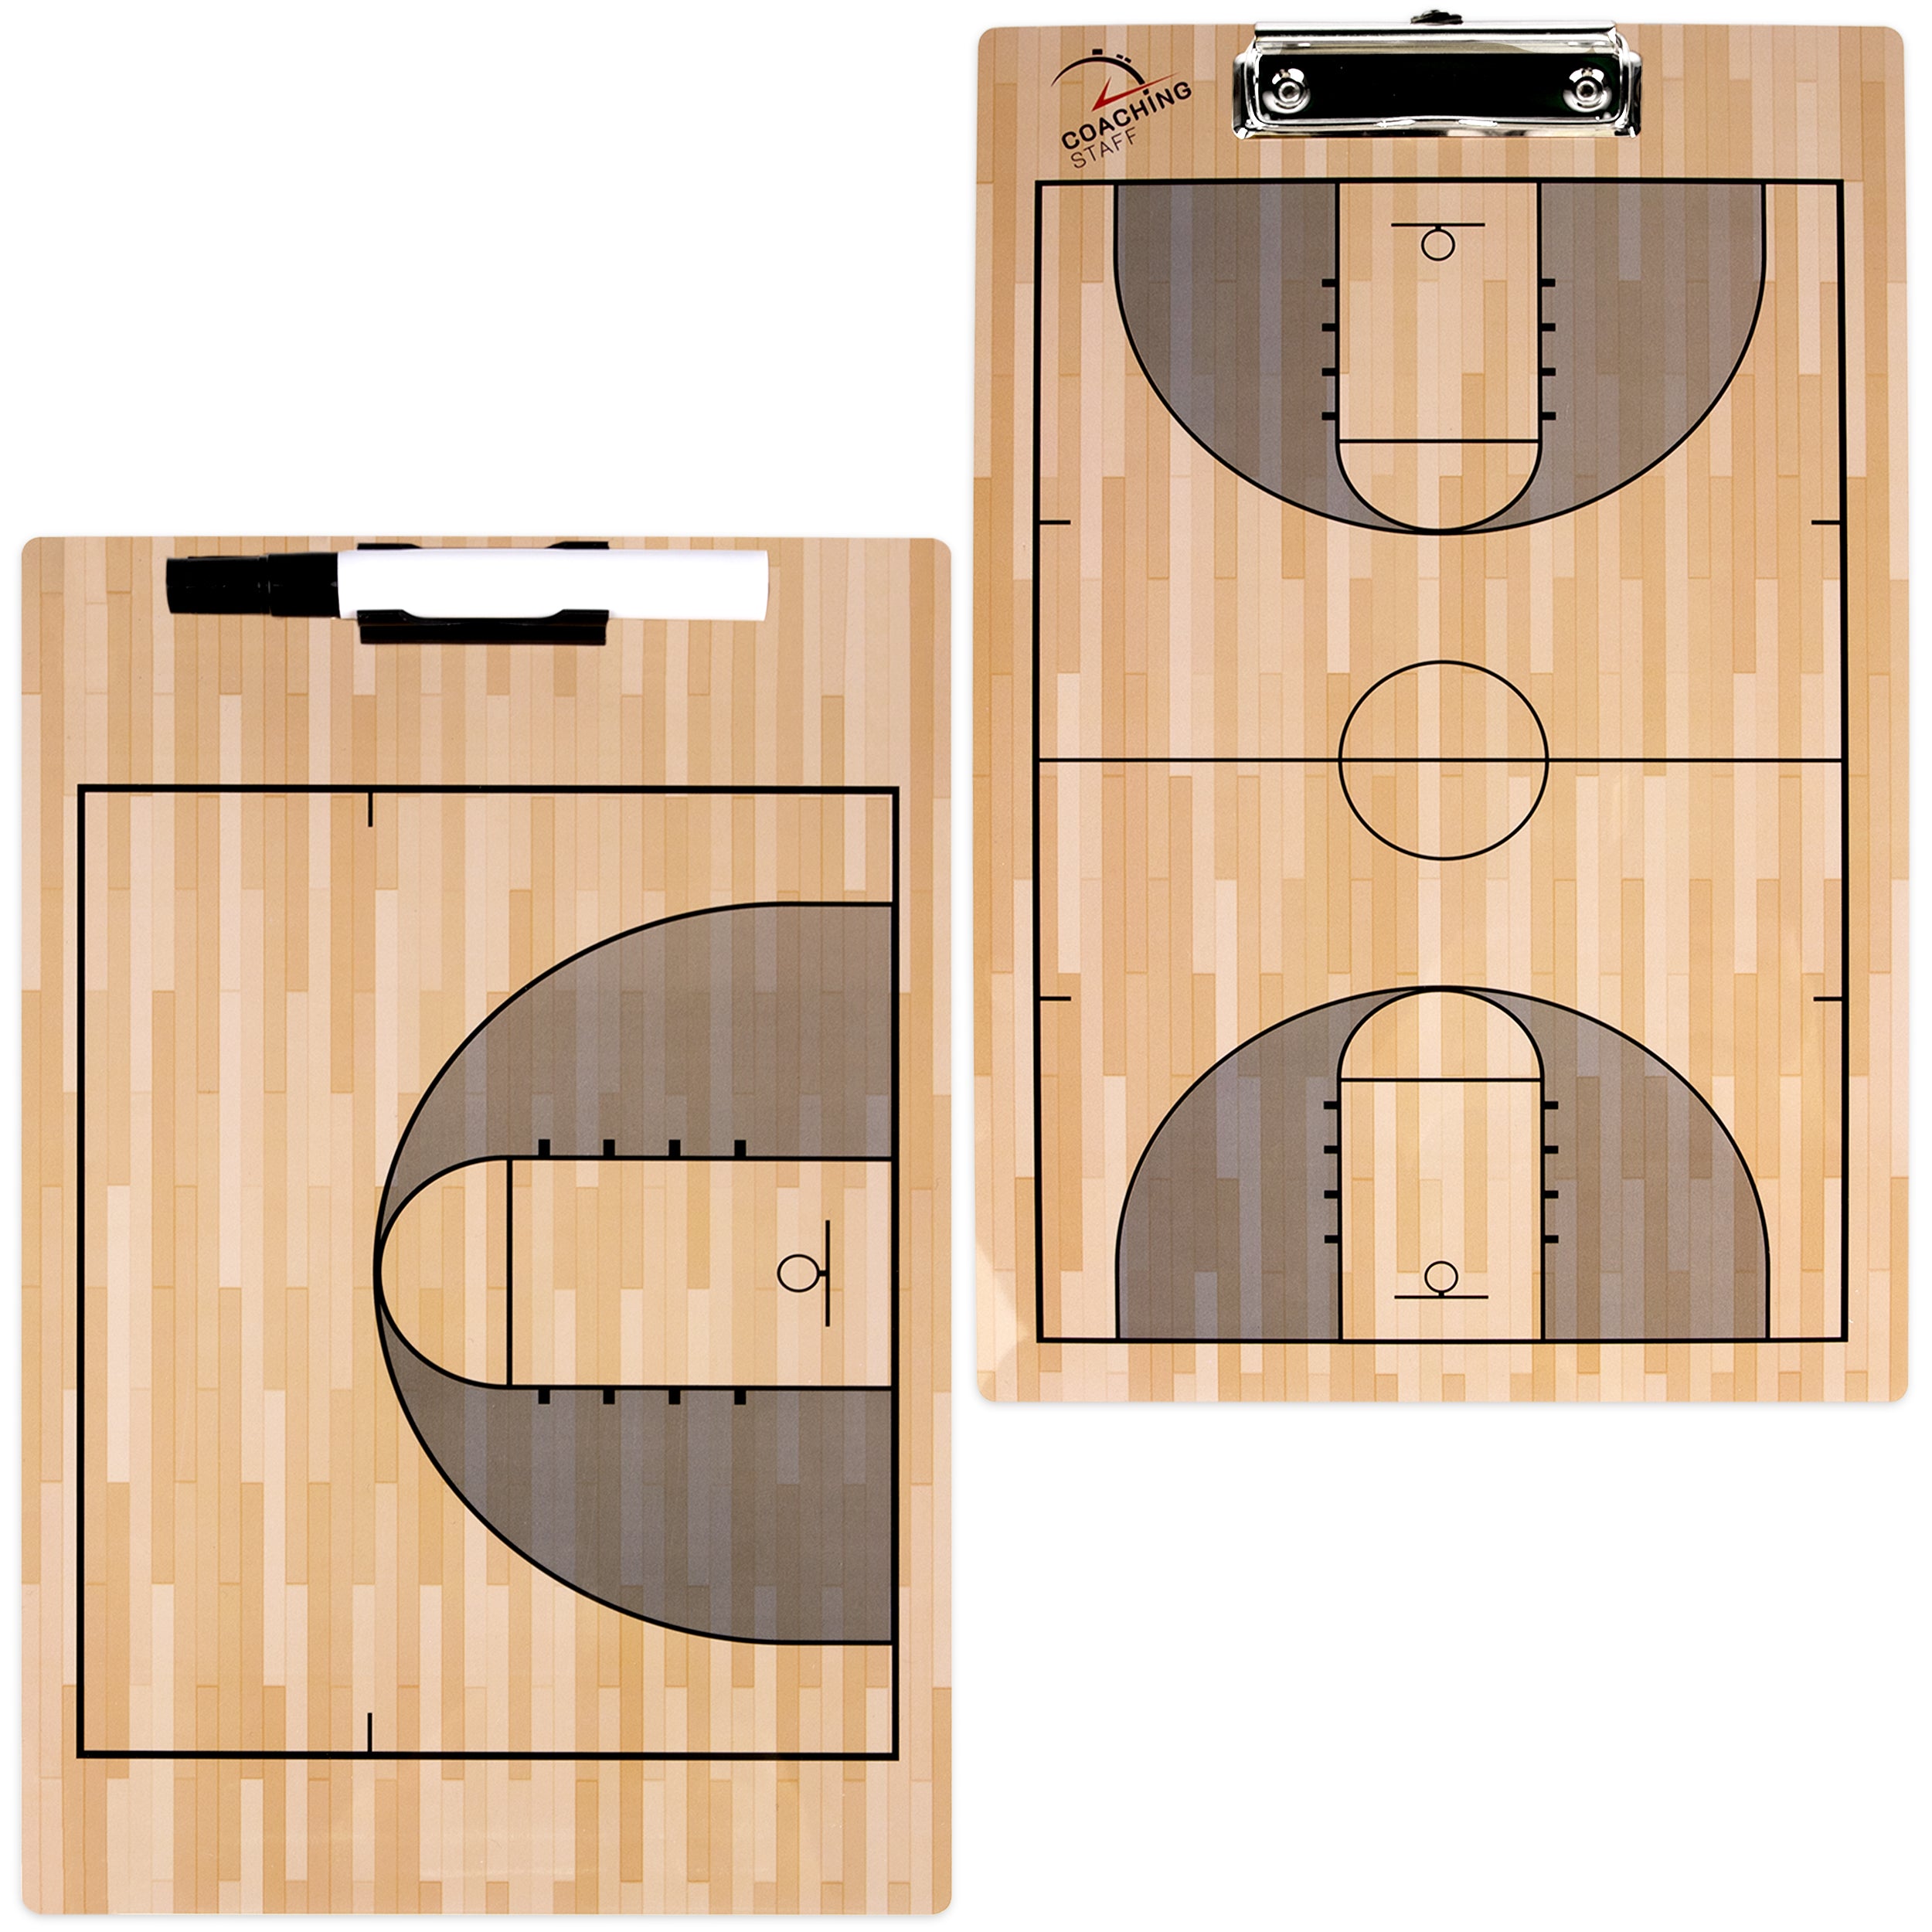 CoachingStaff Ultra-Thick Pro Basketball Coaching Clipboard w/Marker and Dual Clips